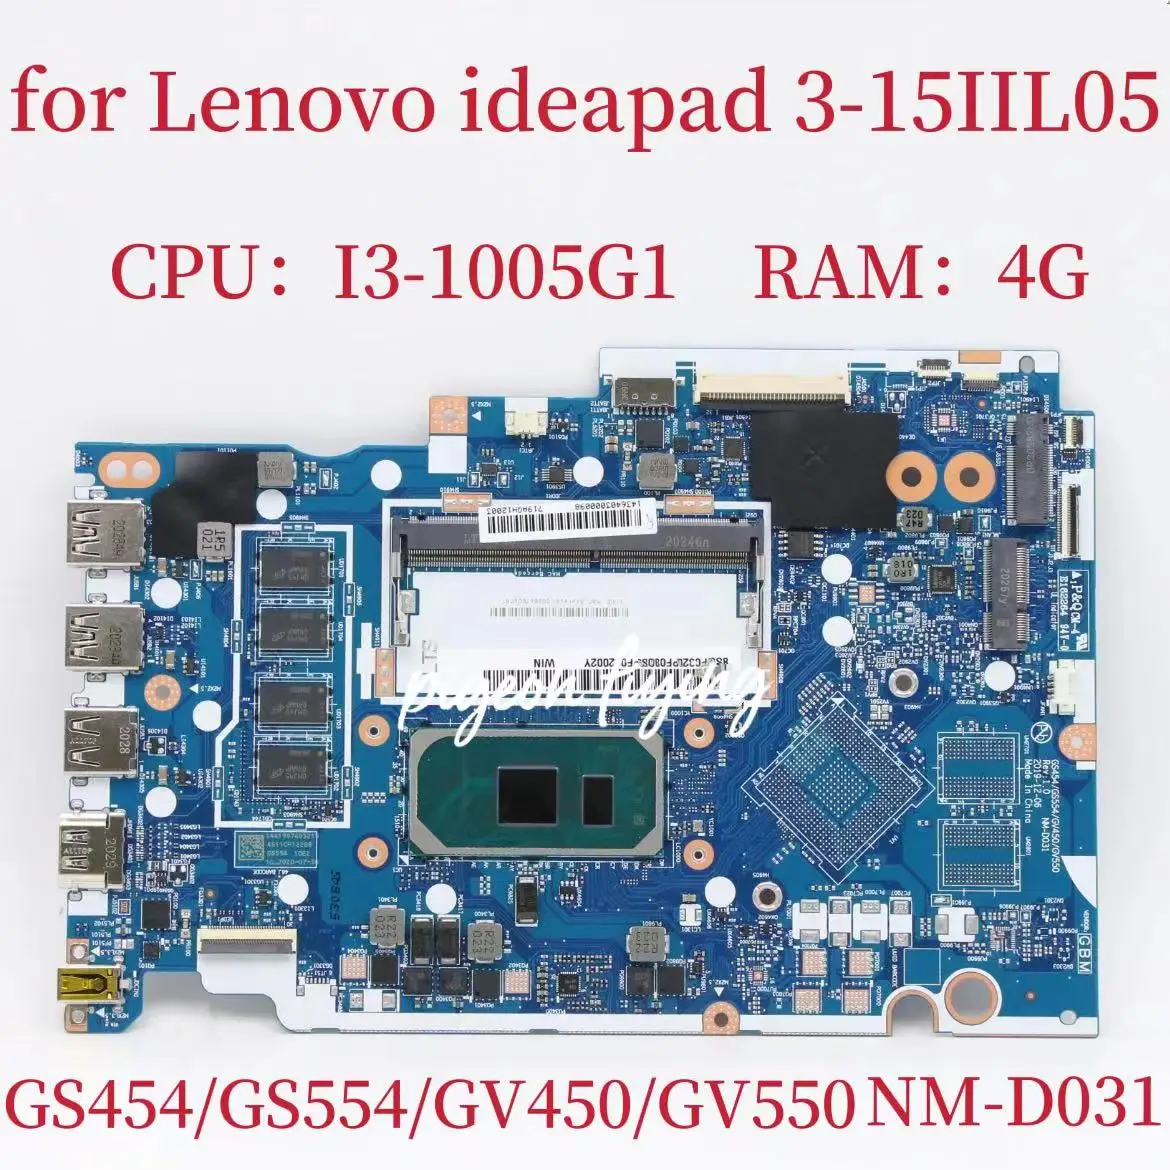 

NM-D031 for Lenovo Ideapad 3-15IIL05 Laptop Motherboard CPU:I3-1005G1 UMA RAM:4G FRU:5B20S44270 5B21B36559 5B21B36558 5B20S44271